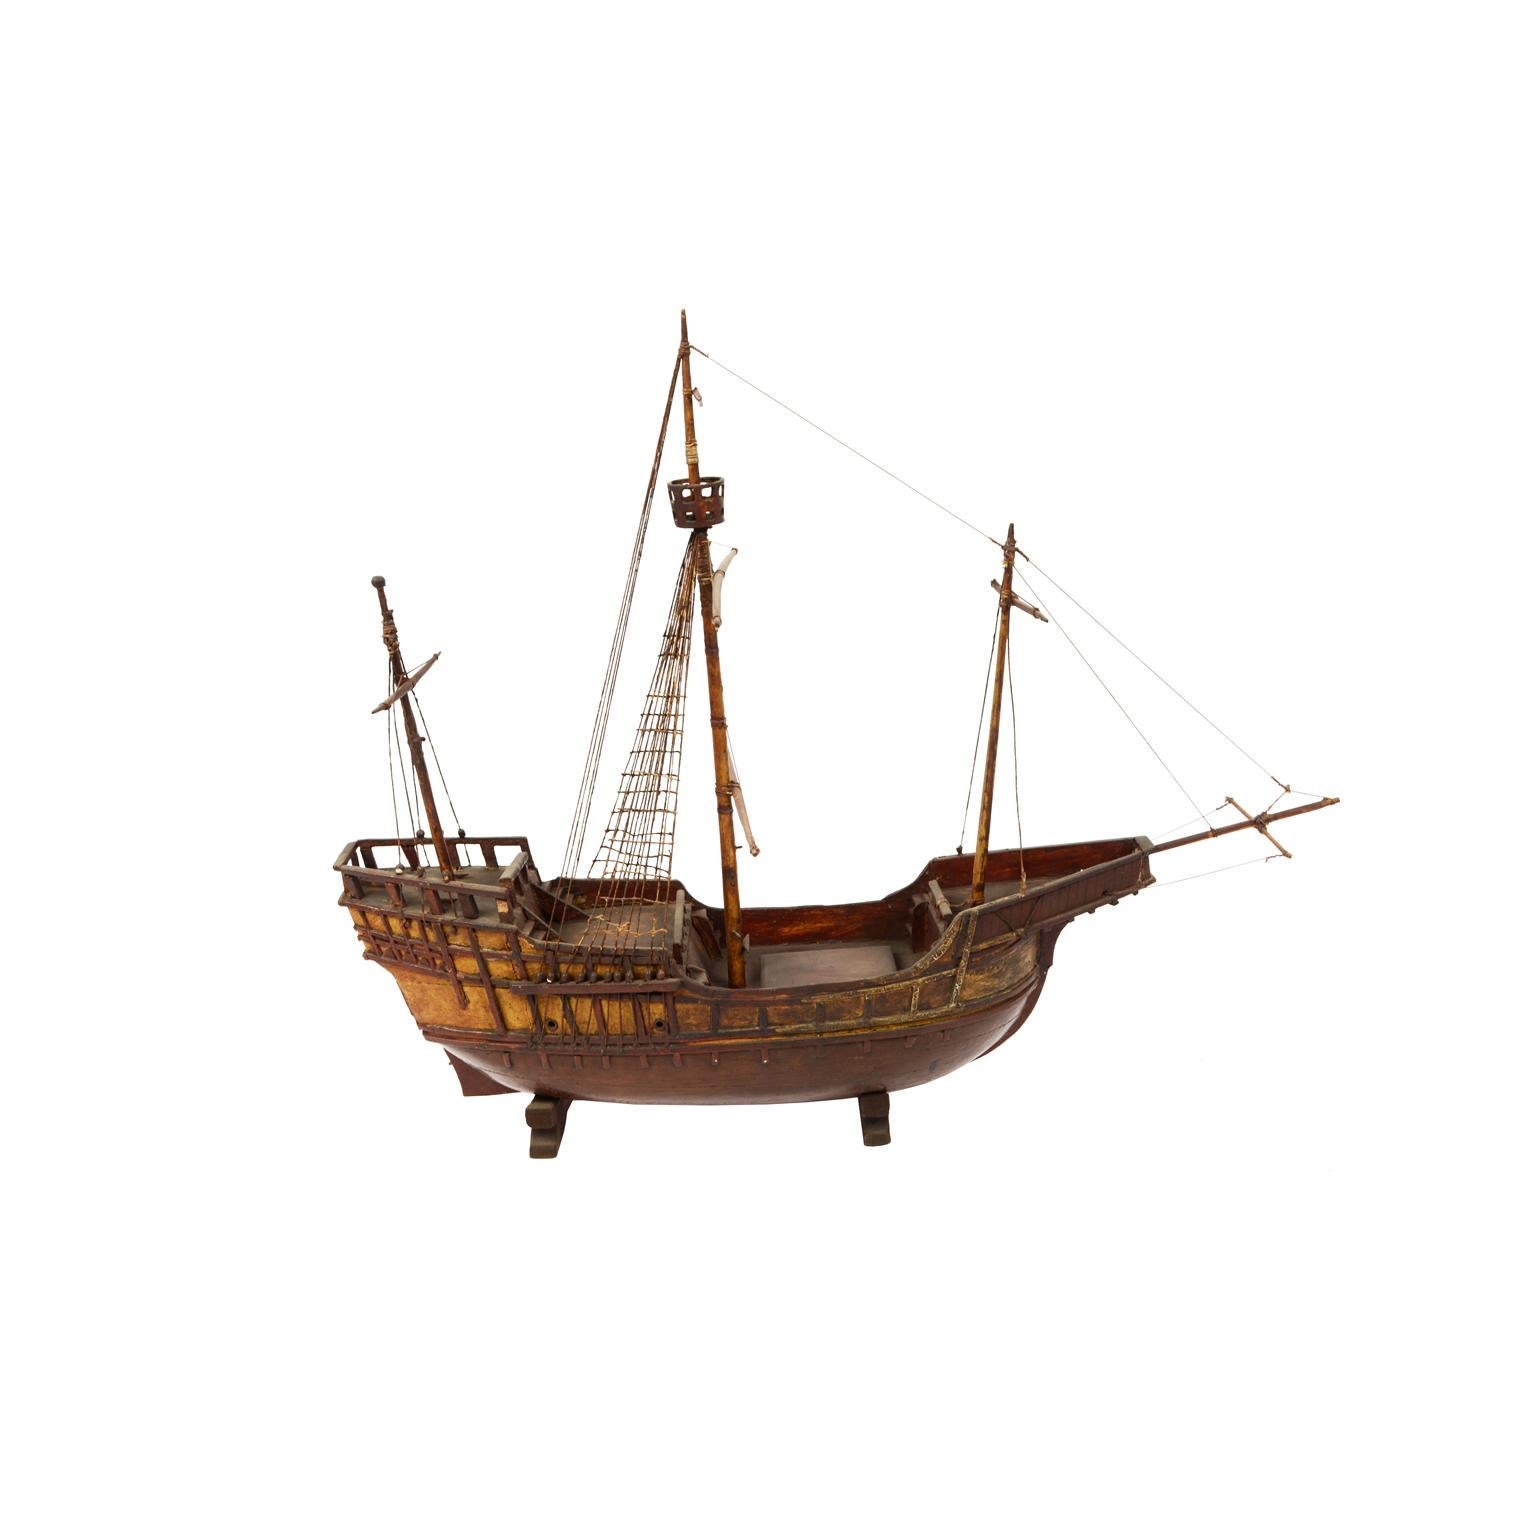 Wooden antique ship model of a cargo-carrack, probably from Genoa, with three masts, end of the 19th century. 
Very good conditions. Measures: Length cm 70 - inches 28, height cm 56 - inches 22.

The carrack or nao (both terms mean simply 